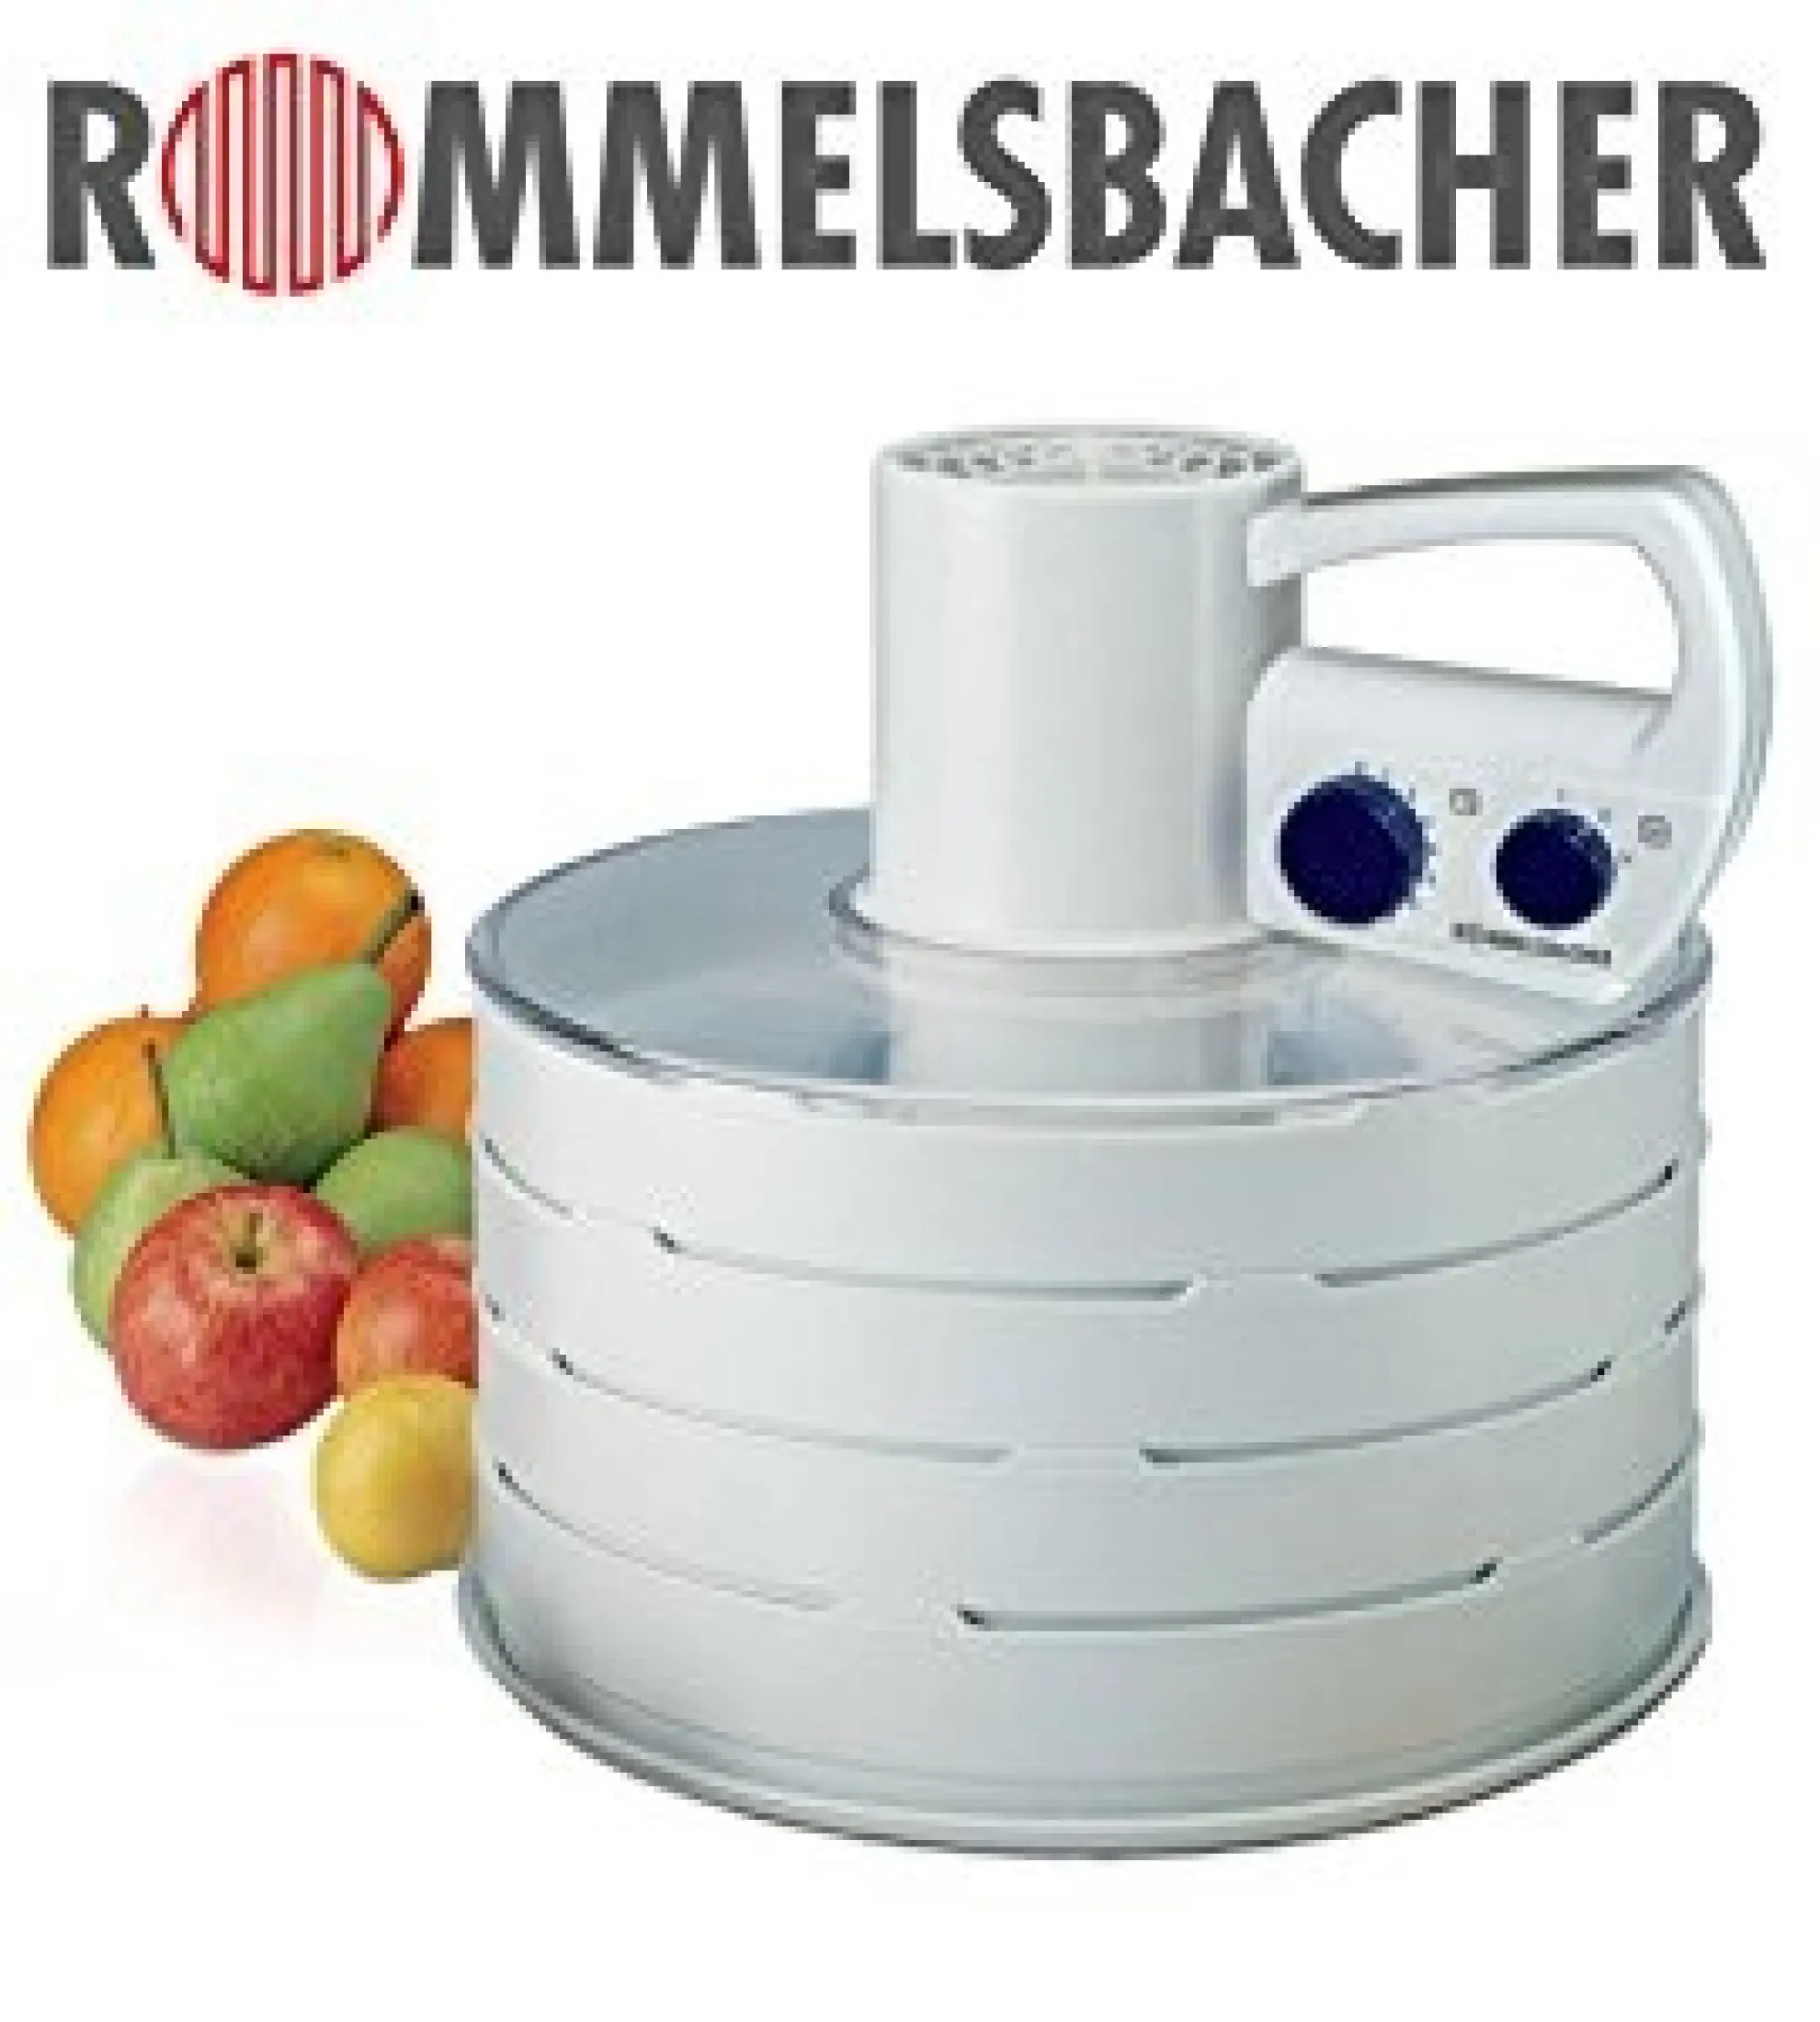 ROMMELSBACHER DA 750 DA750 with innovative technology for meat, vegetables, mushrooms & more, total surface area over 3000 cm², expandable) white Lazada Singapore